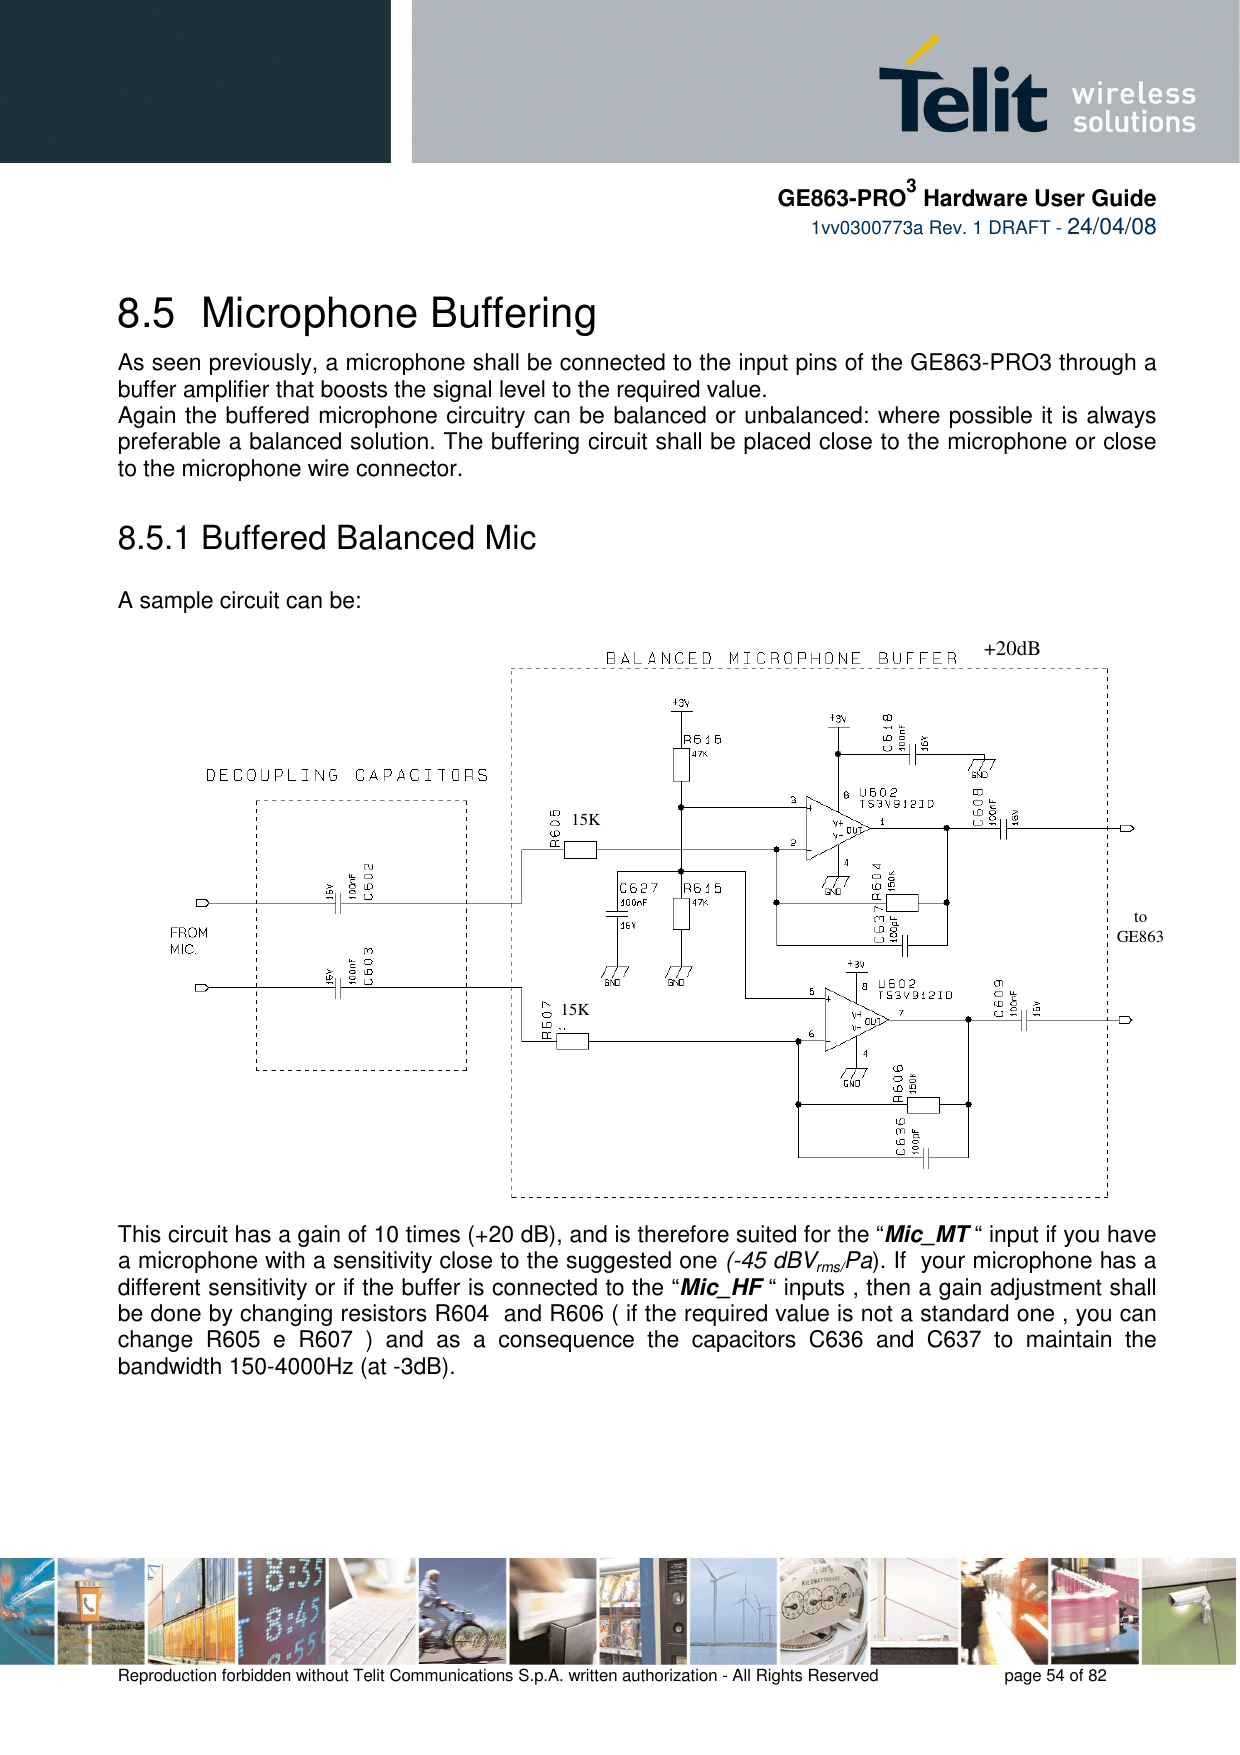     GE863-PRO3 Hardware User Guide  1vv0300773a Rev. 1 DRAFT - 24/04/08    Reproduction forbidden without Telit Communications S.p.A. written authorization - All Rights Reserved    page 54 of 82  8.5  Microphone Buffering As seen previously, a microphone shall be connected to the input pins of the GE863-PRO3 through a buffer amplifier that boosts the signal level to the required value. Again the buffered microphone circuitry can be balanced or unbalanced: where possible it is always preferable a balanced solution. The buffering circuit shall be placed close to the microphone or close to the microphone wire connector. 8.5.1 Buffered Balanced Mic  A sample circuit can be: This circuit has a gain of 10 times (+20 dB), and is therefore suited for the “Mic_MT “ input if you have a microphone with a sensitivity close to the suggested one (-45 dBVrms/Pa). If  your microphone has a different sensitivity or if the buffer is connected to the “Mic_HF “ inputs , then a gain adjustment shall be done by changing resistors R604  and R606 ( if the required value is not a standard one , you can change  R605  e  R607  )  and  as  a  consequence  the  capacitors  C636  and  C637  to  maintain  the bandwidth 150-4000Hz (at -3dB).  270pF  270pF  +20dB 15K 15K to GE863